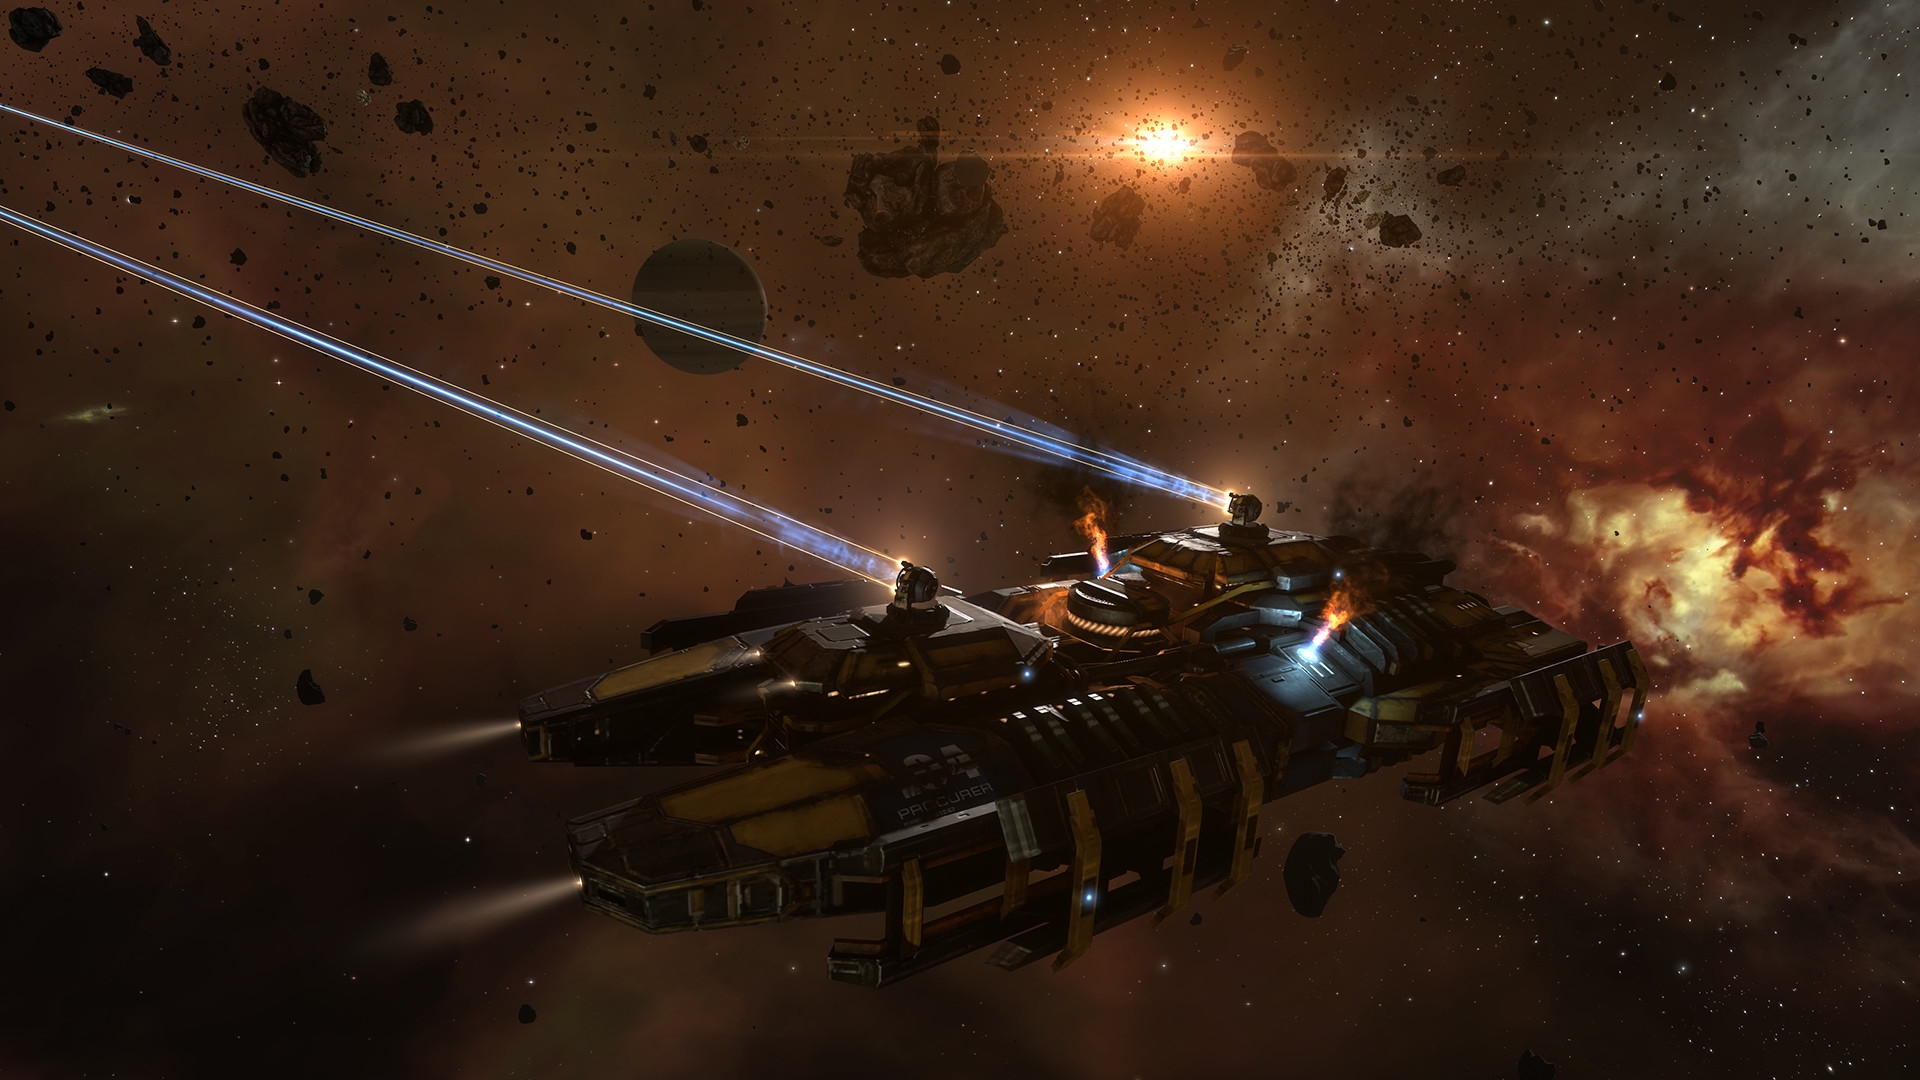 Best free MMOs: EVE Online. Image shows a spaceship firing a laser in space.